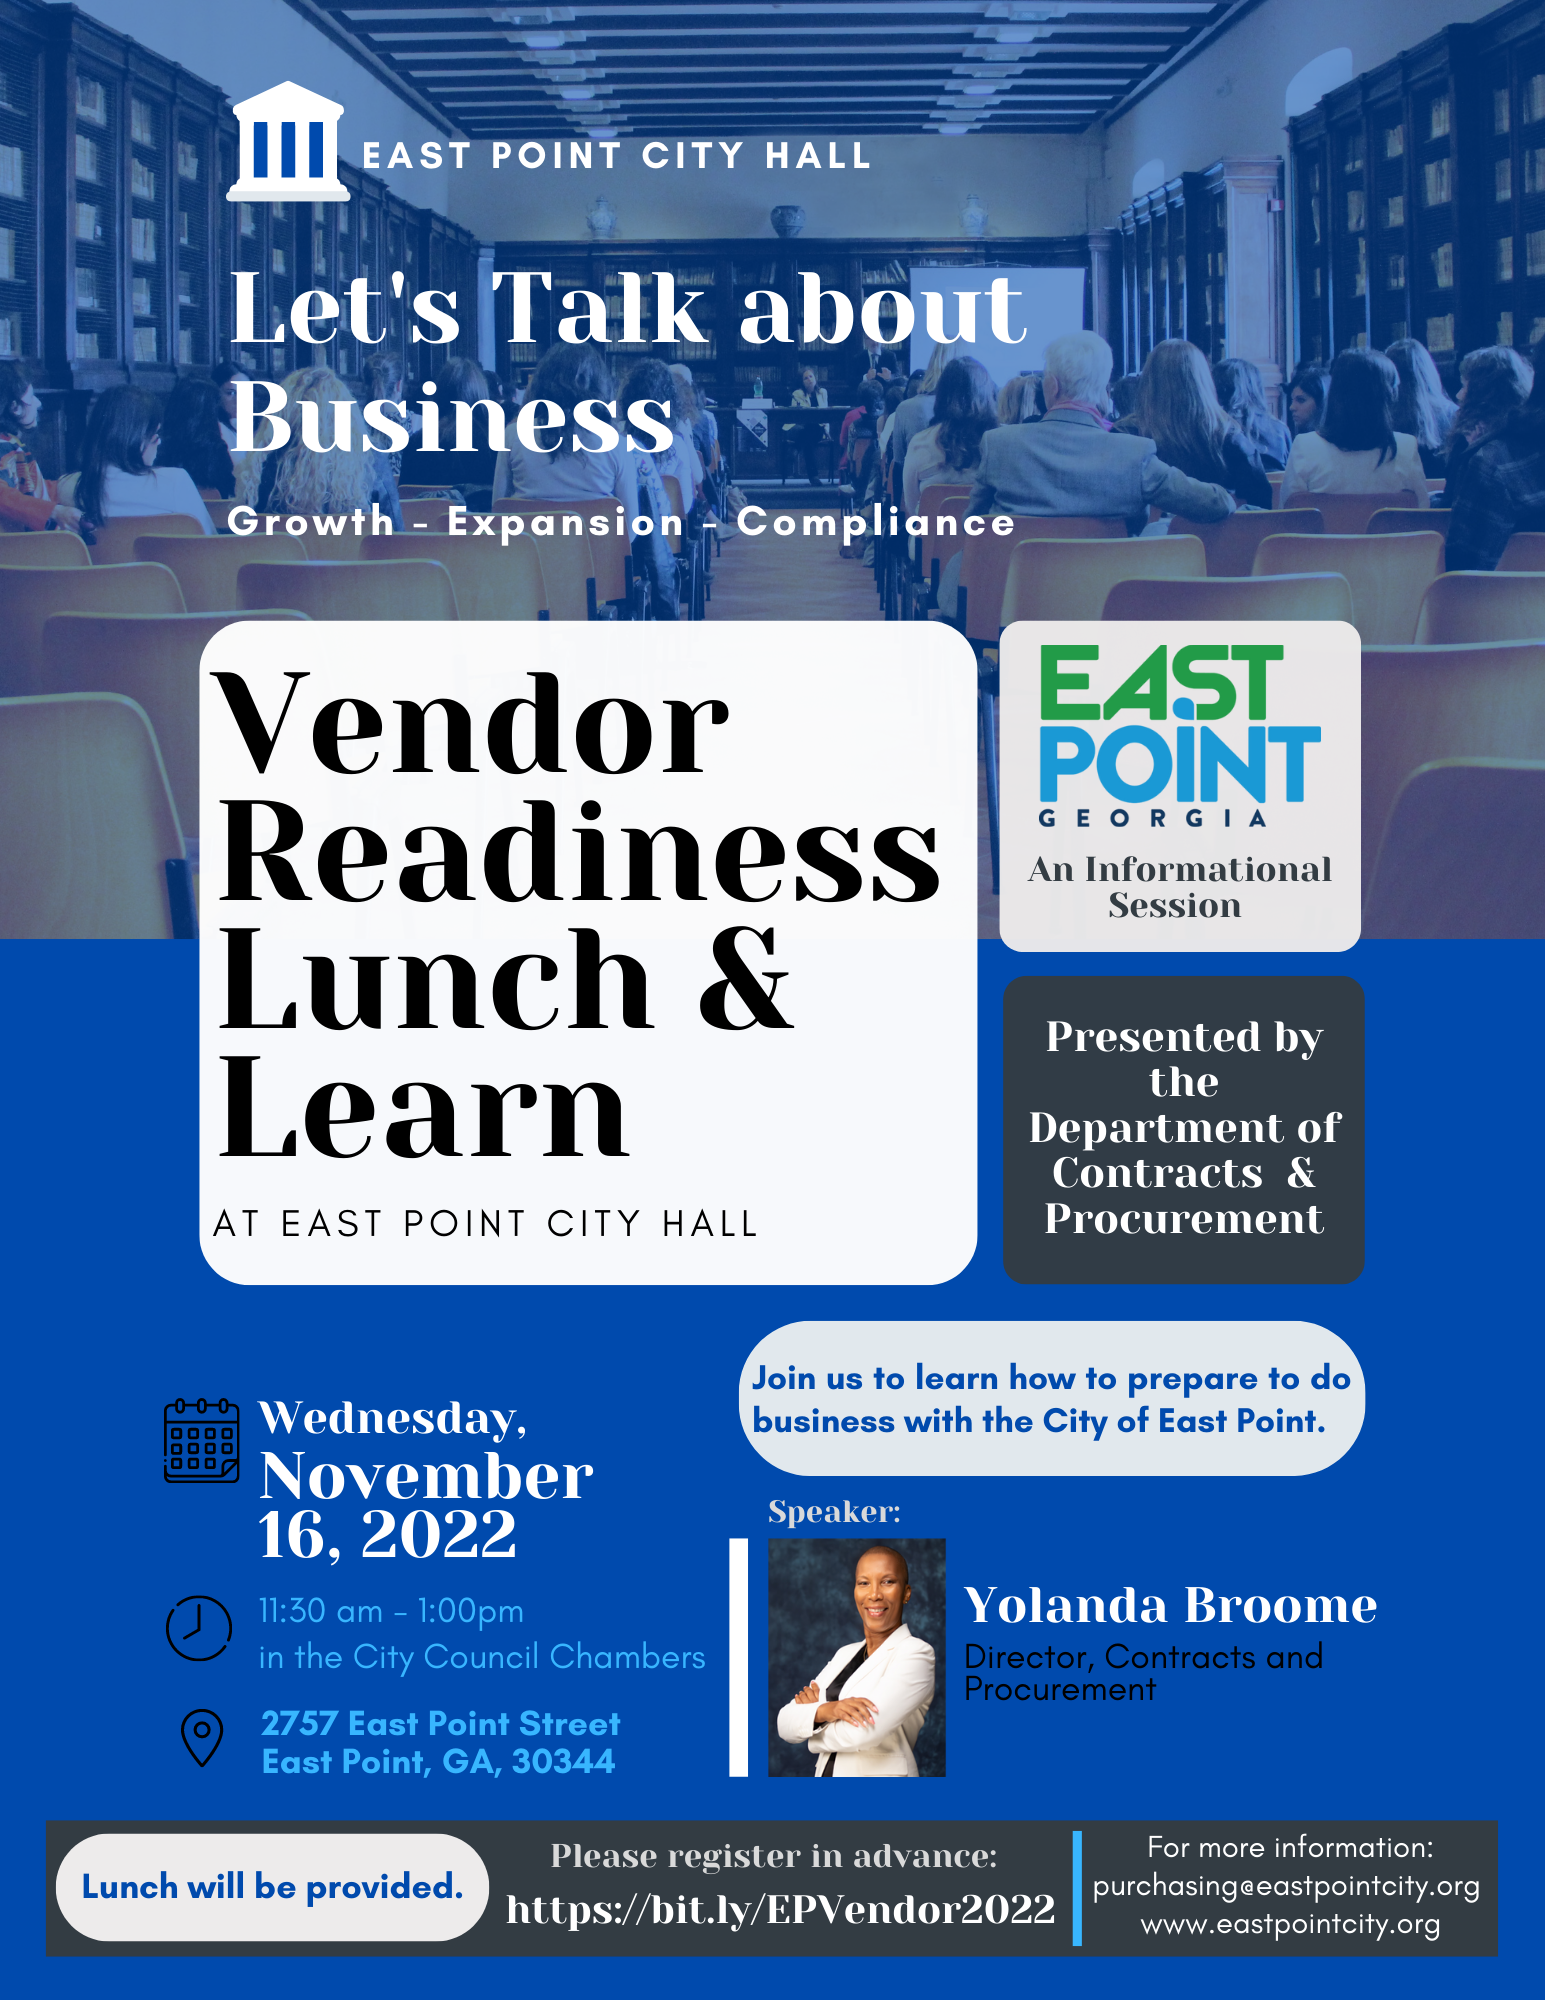 Vendor Readiness Lunch & Learn for November 16th